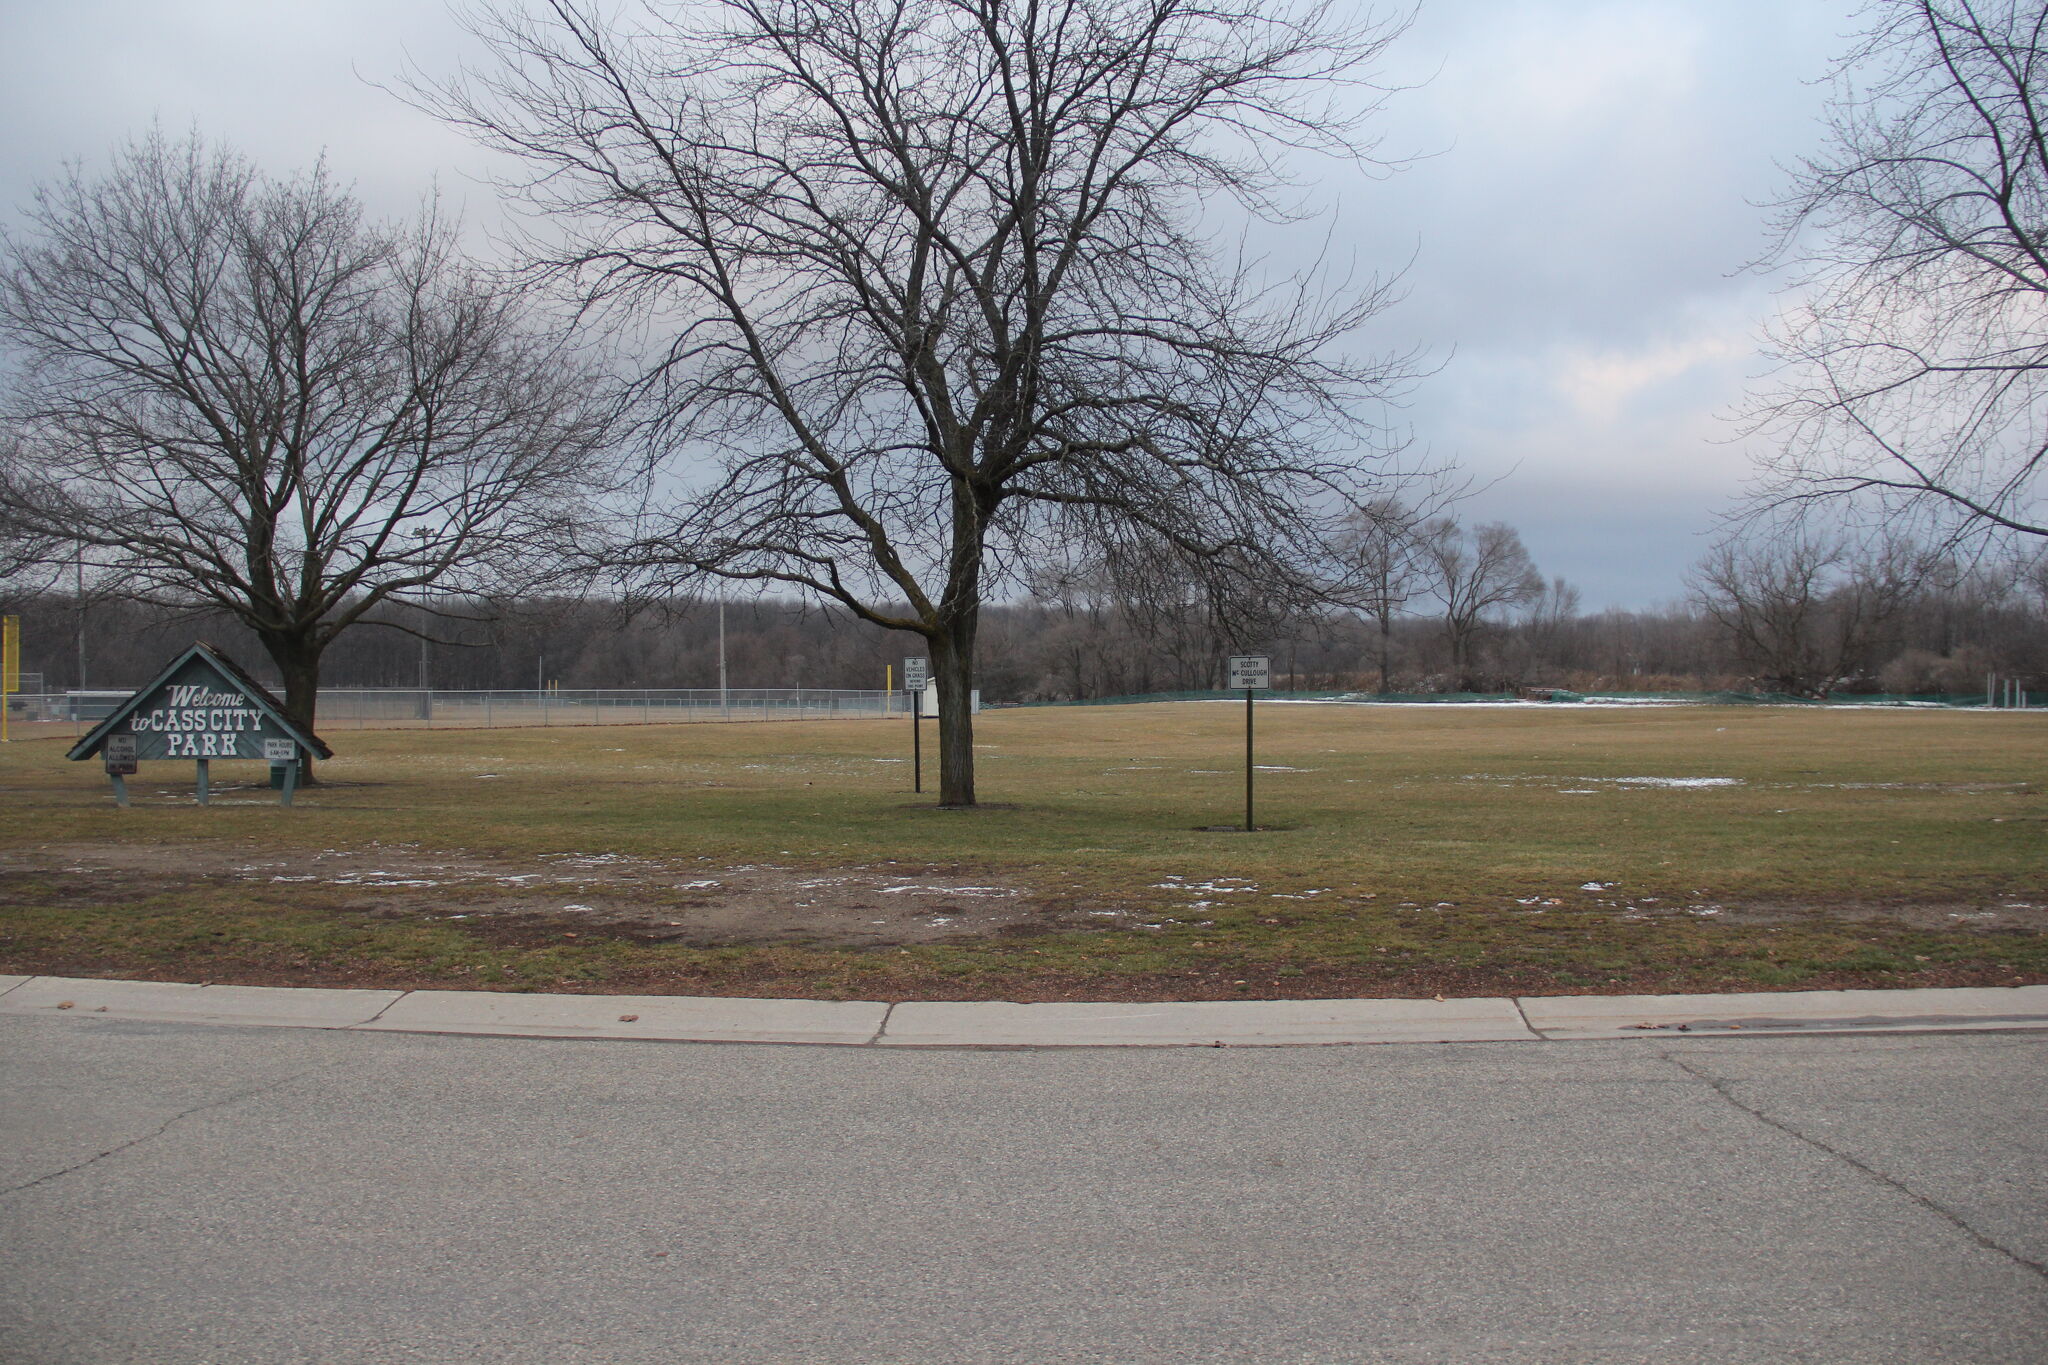 Dog park to potentially be added to Cass City park